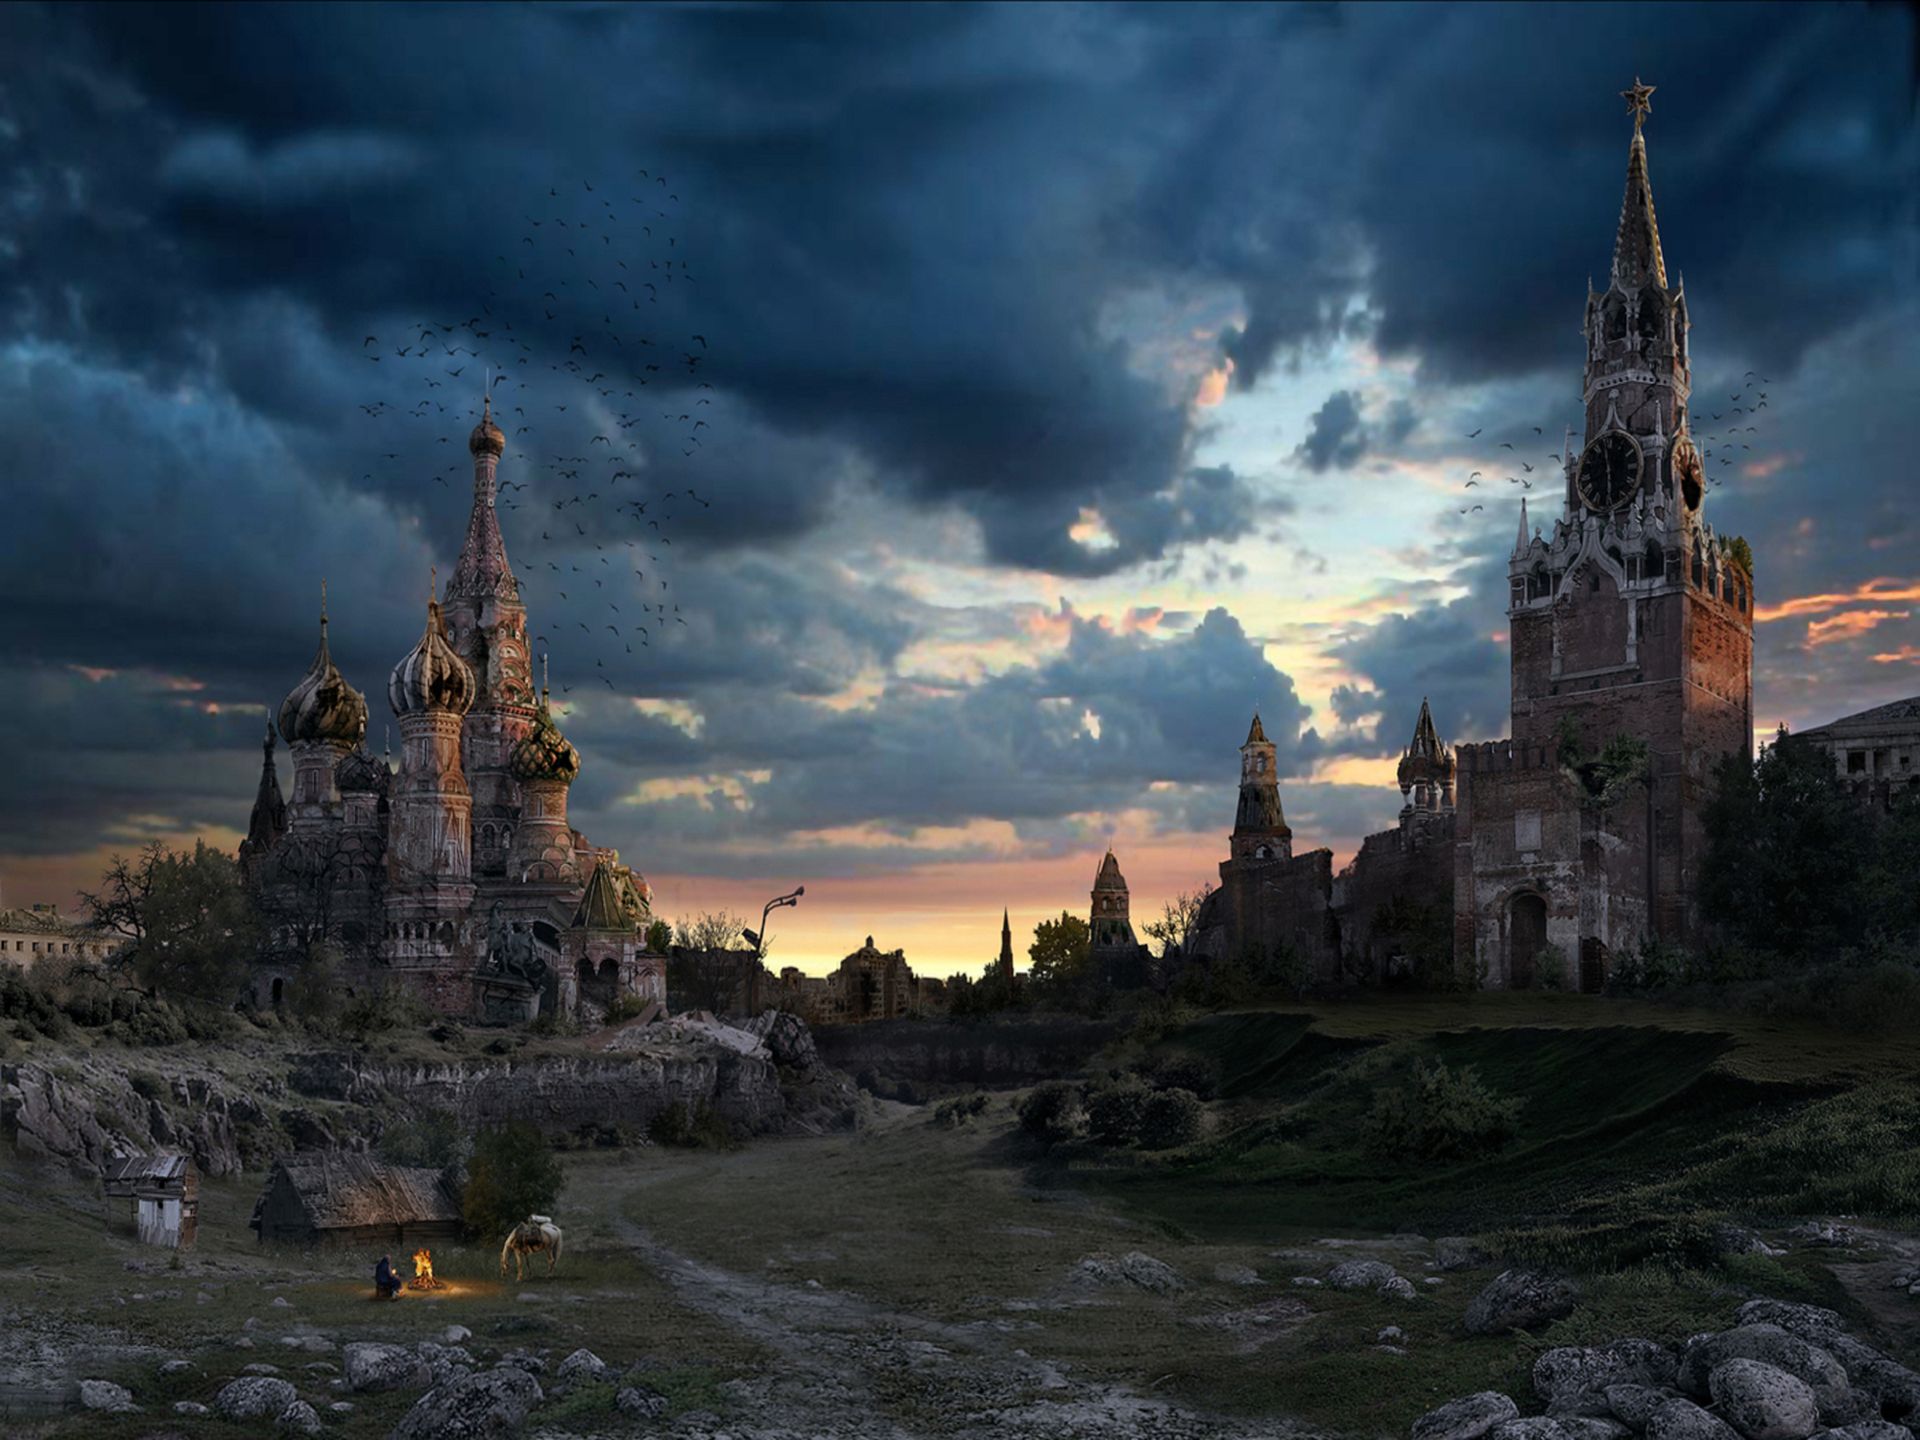 sci fi, post apocalyptic, building, church, moscow, russia